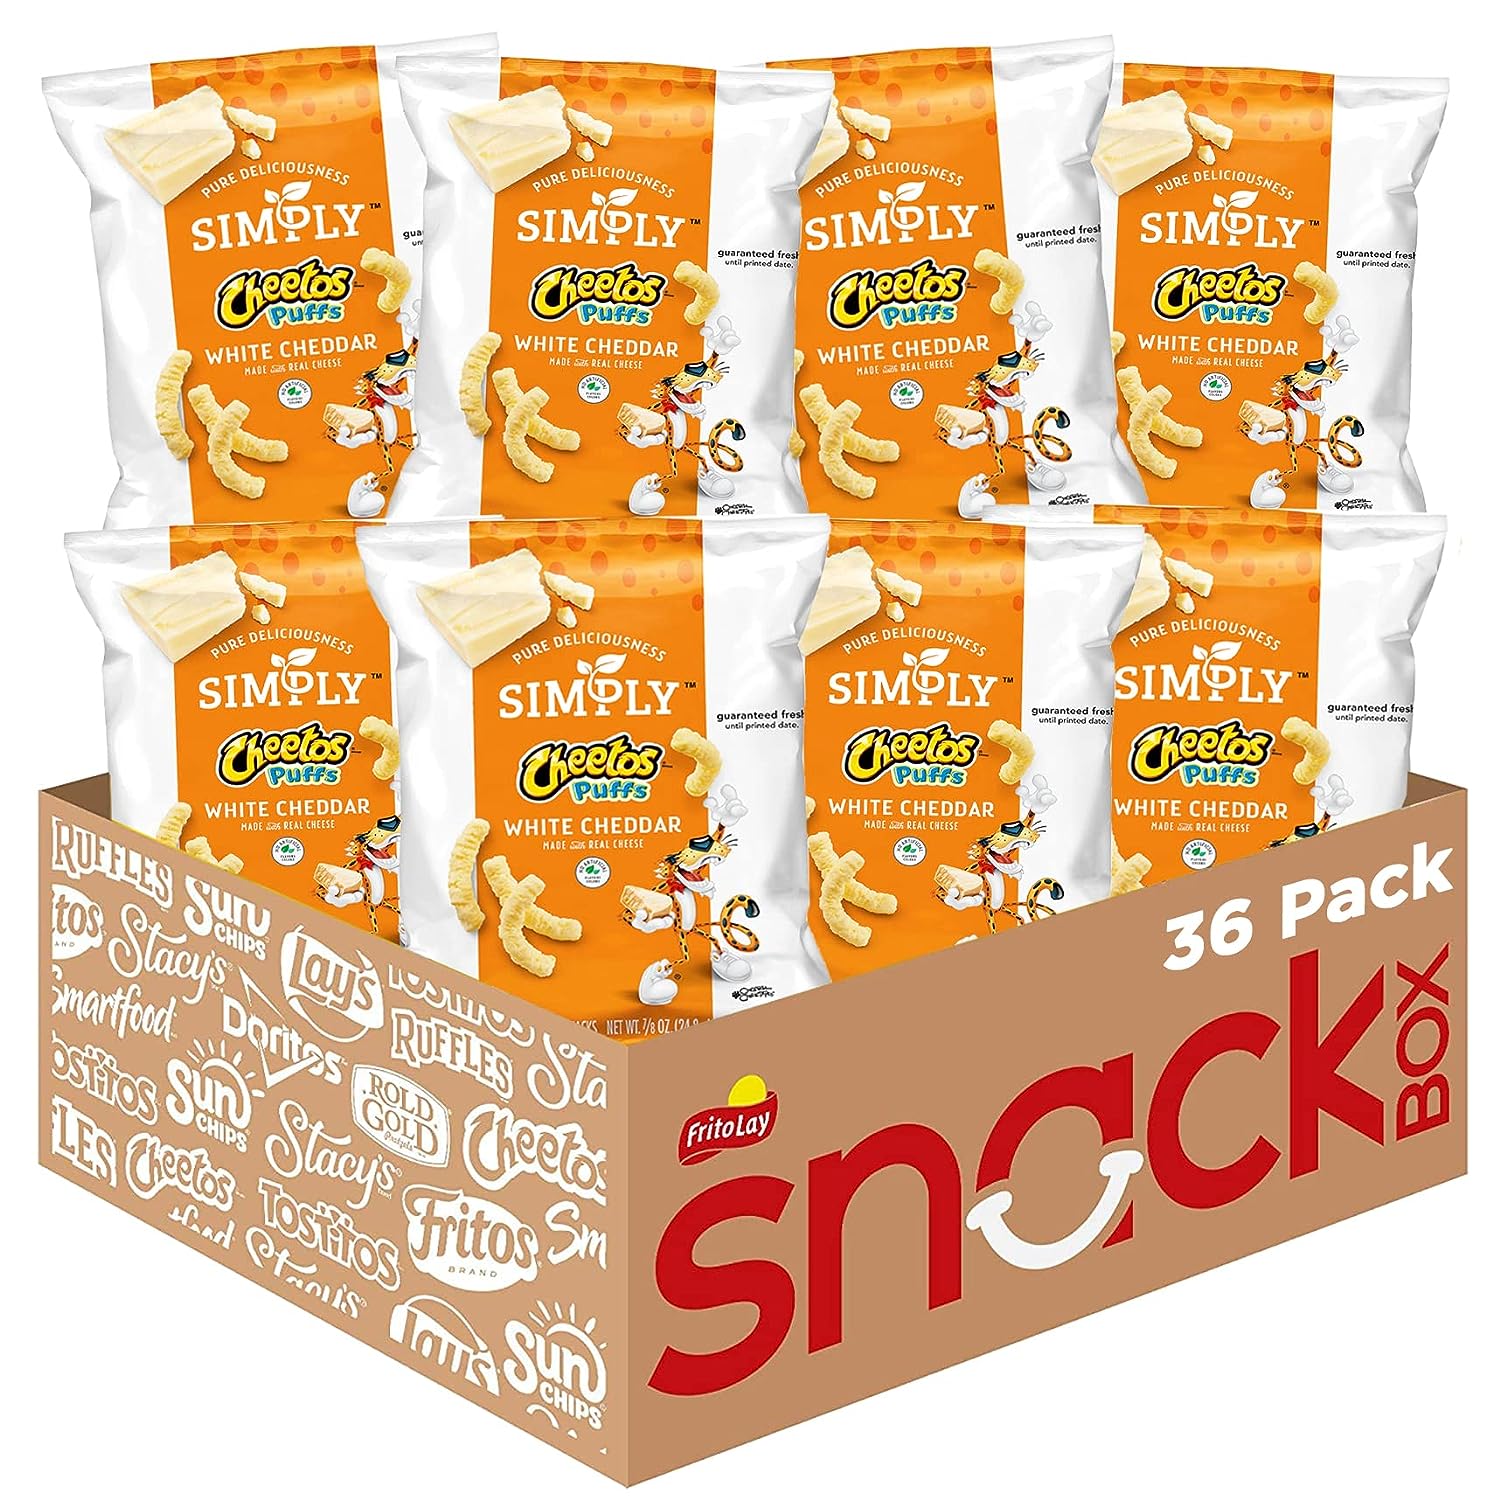 Wholesale prices with free shipping all over United States Simply Brand Variety Pack, Doritos, Cheetos, Lay's, 0.875oz Bags (36 Pack) (Assortment May Vary) - Steven Deals